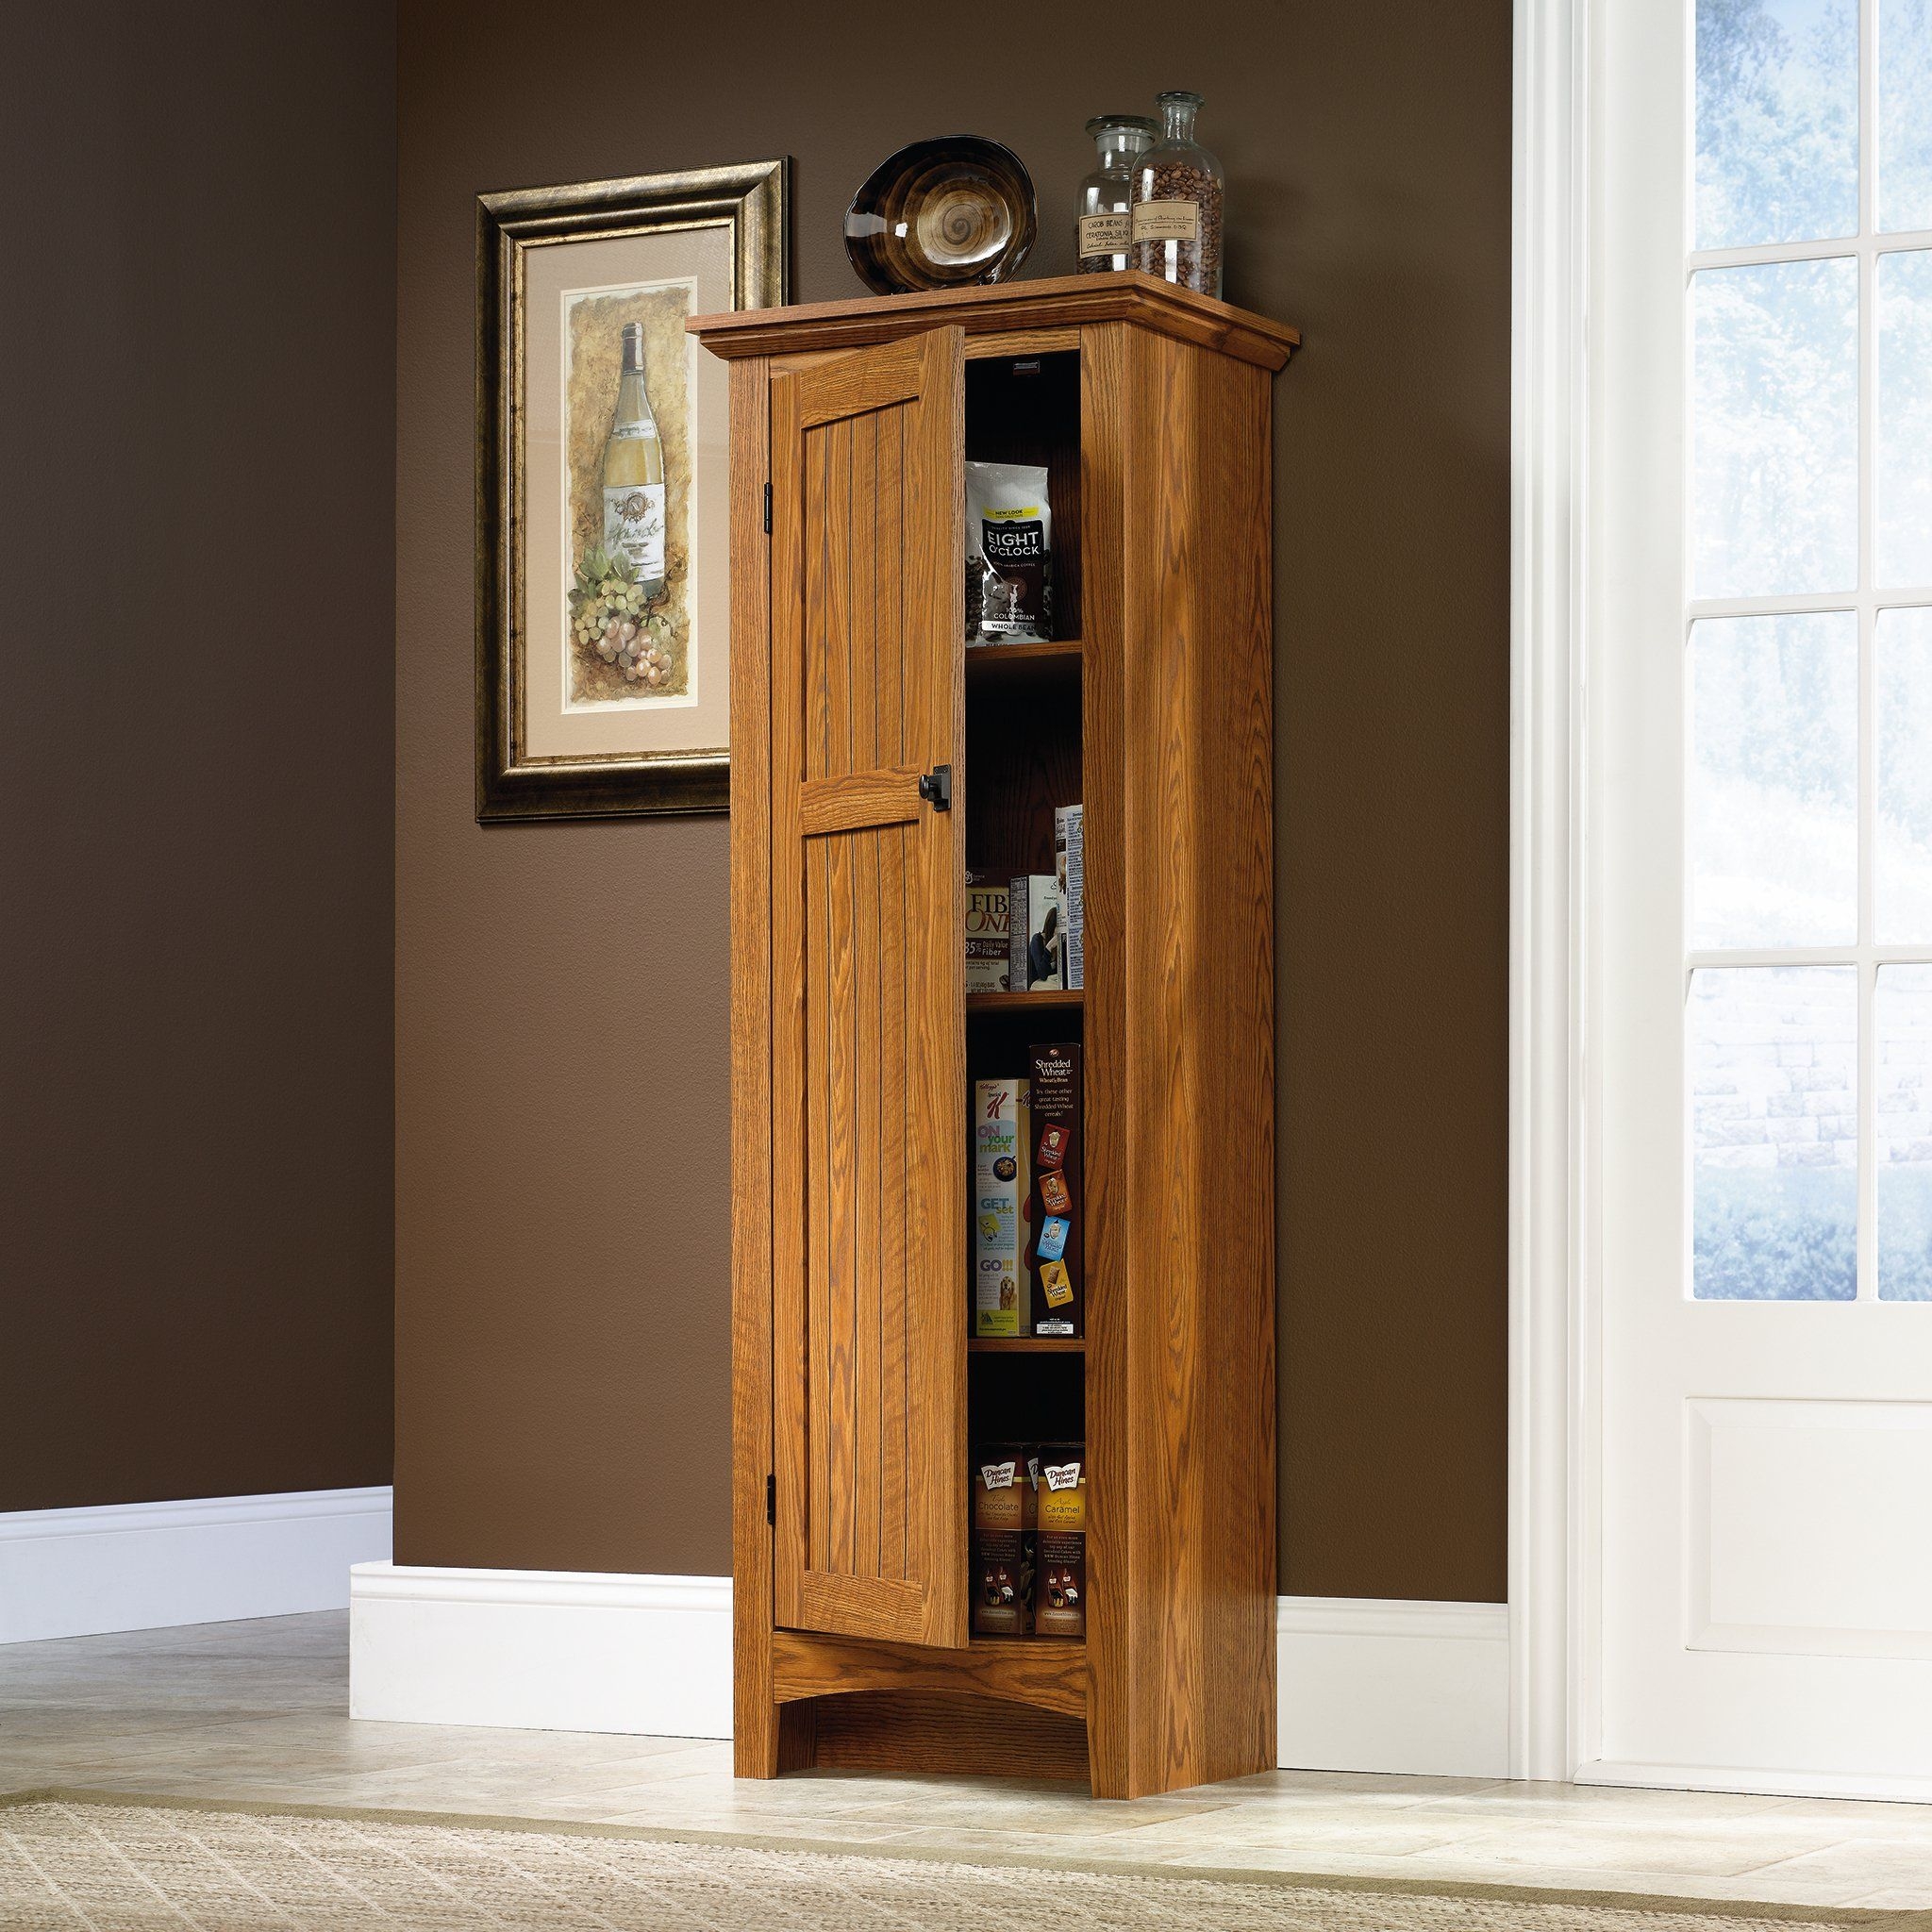 Tall Wood Storage Cabinets With Doors You Ll Love In 2021 Visualhunt